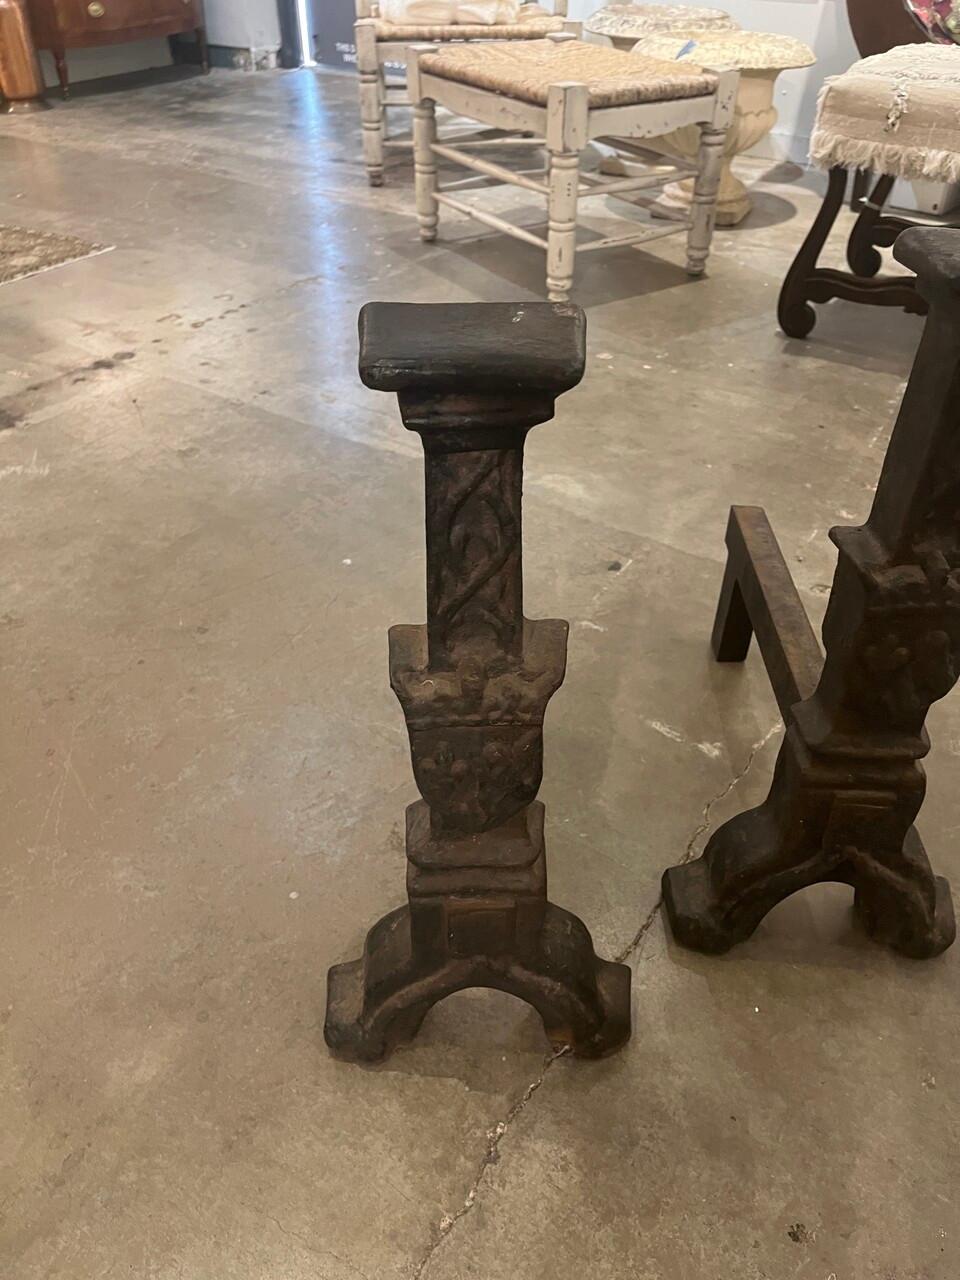 These 17th-century French cast iron gothic-style andirons are a testament to the craftsmanship of the era. Intricately designed with ornate details reminiscent of Gothic architecture, they evoke a sense of medieval grandeur. Their sturdy